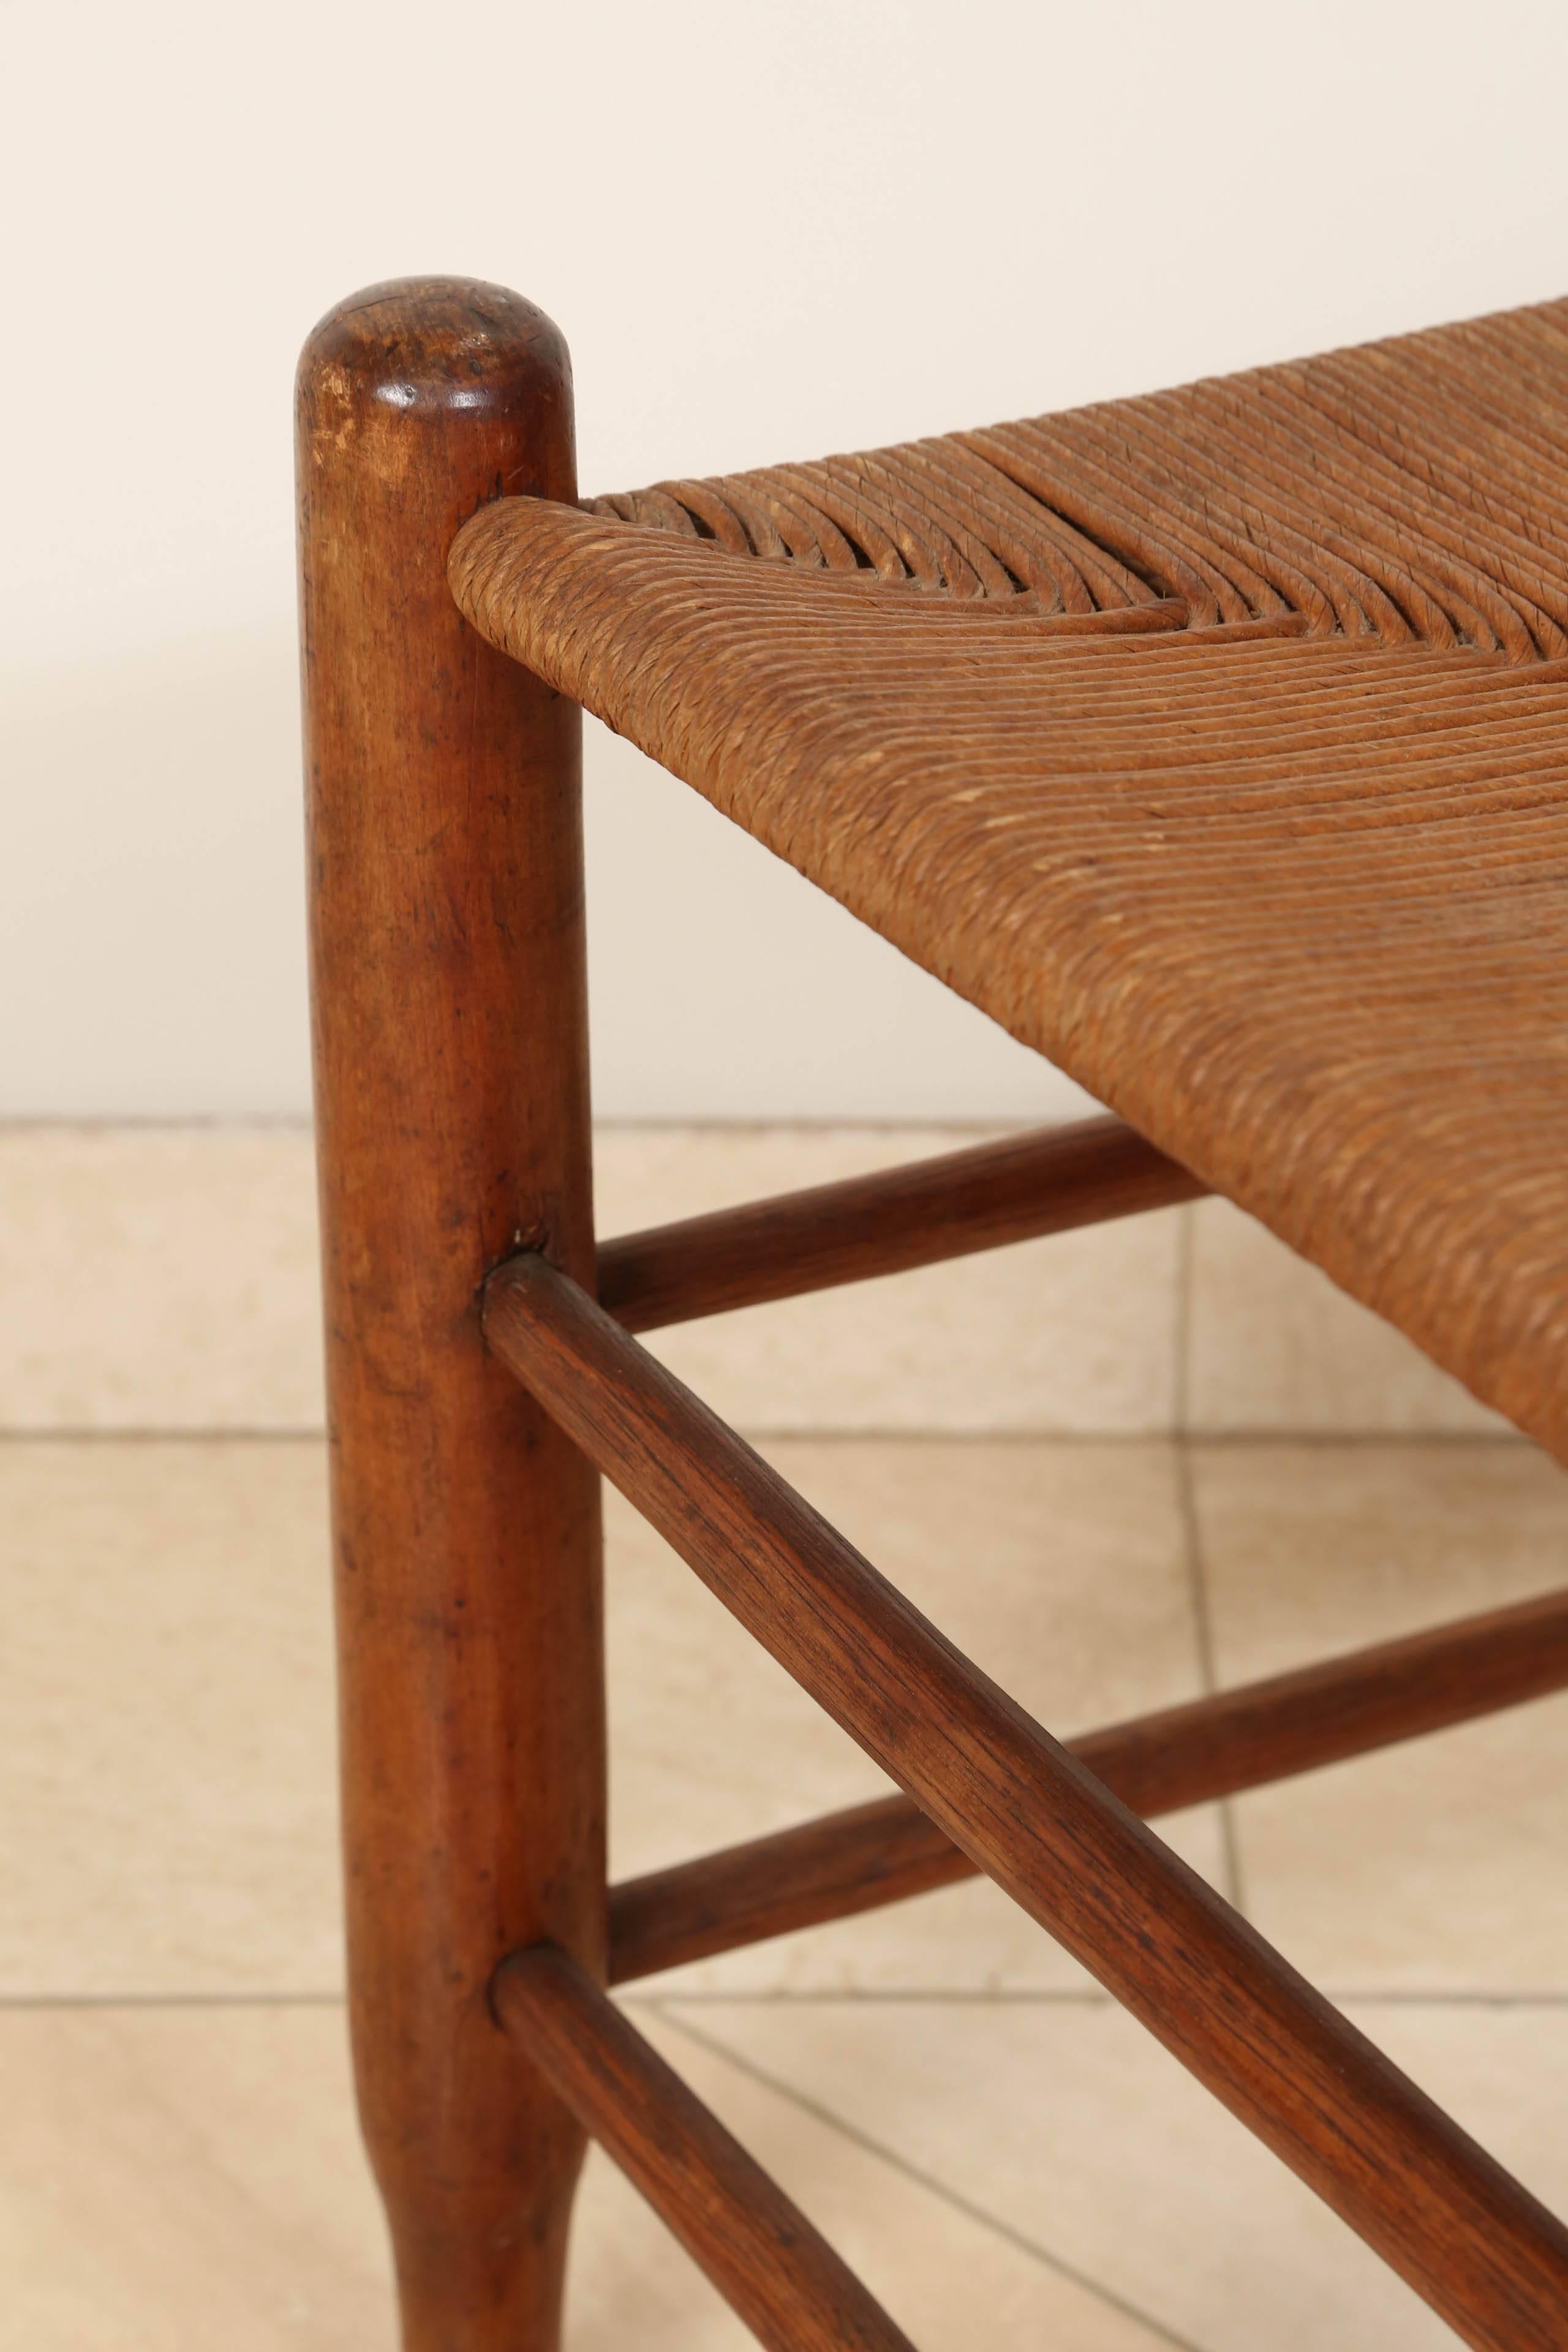 Hand-Crafted Wooden French Provincial Country Oak Stool with Woven Reed seating